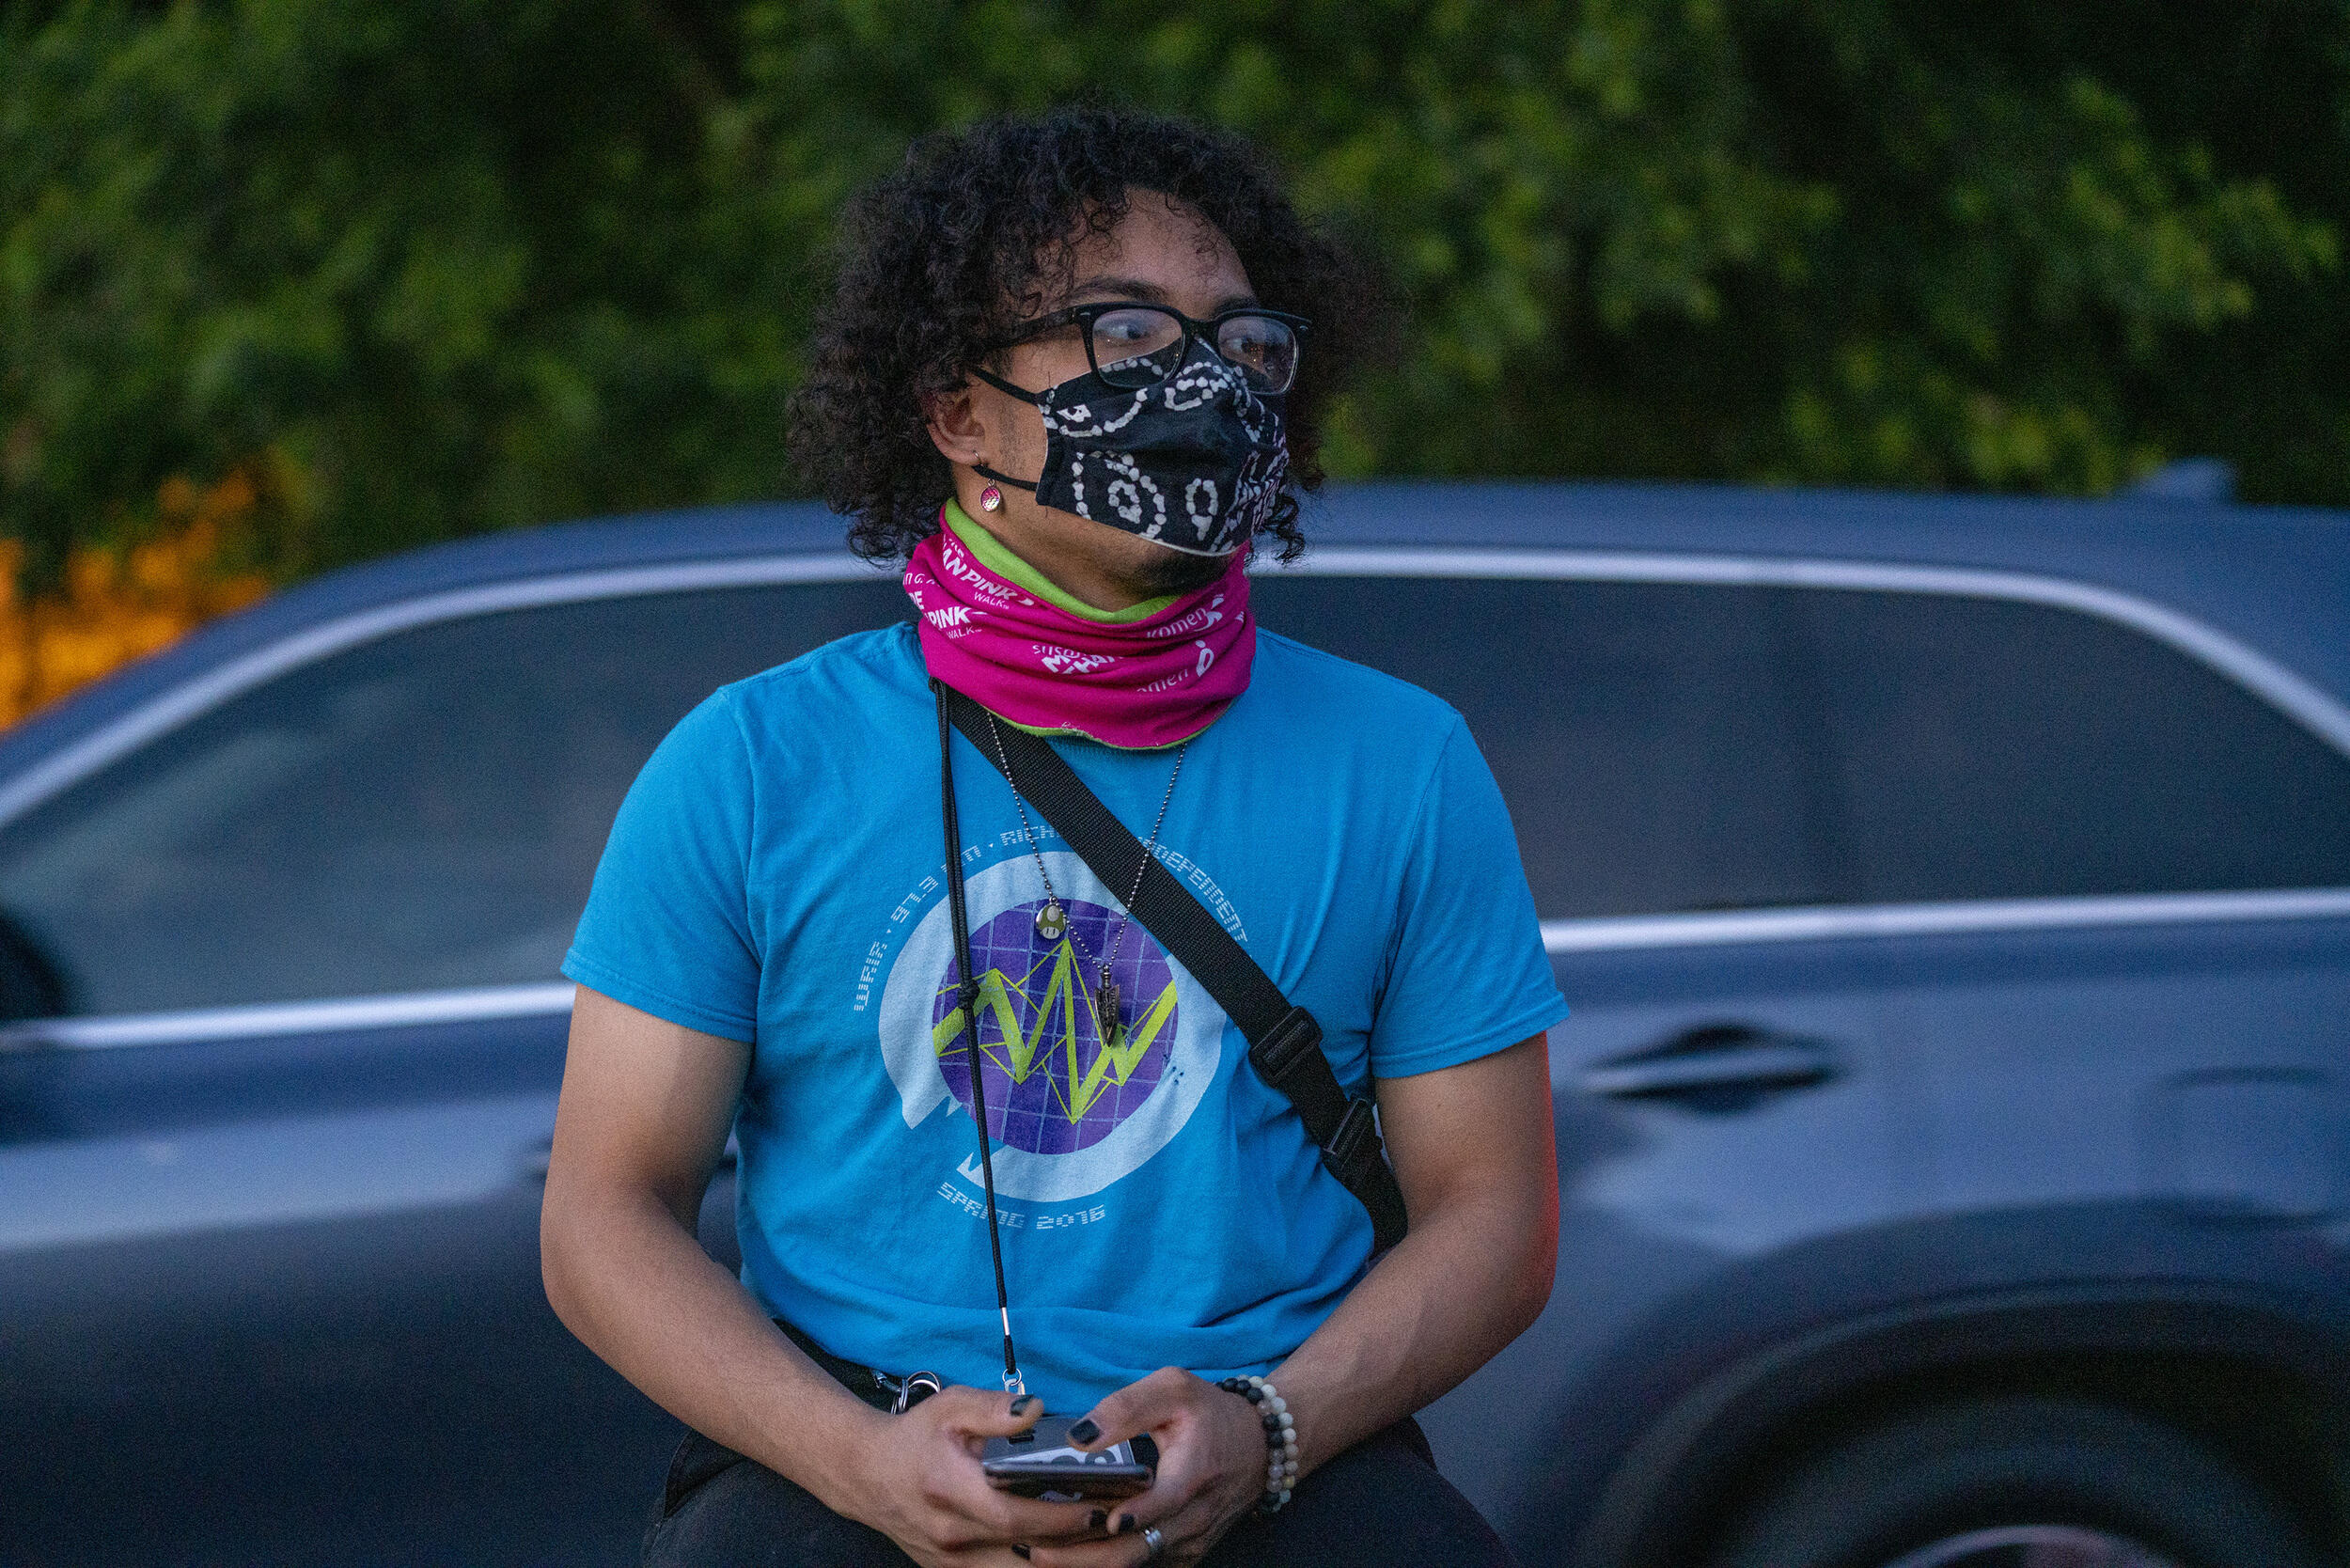 A person wearing a mask stands holding a cellphone in their hands.